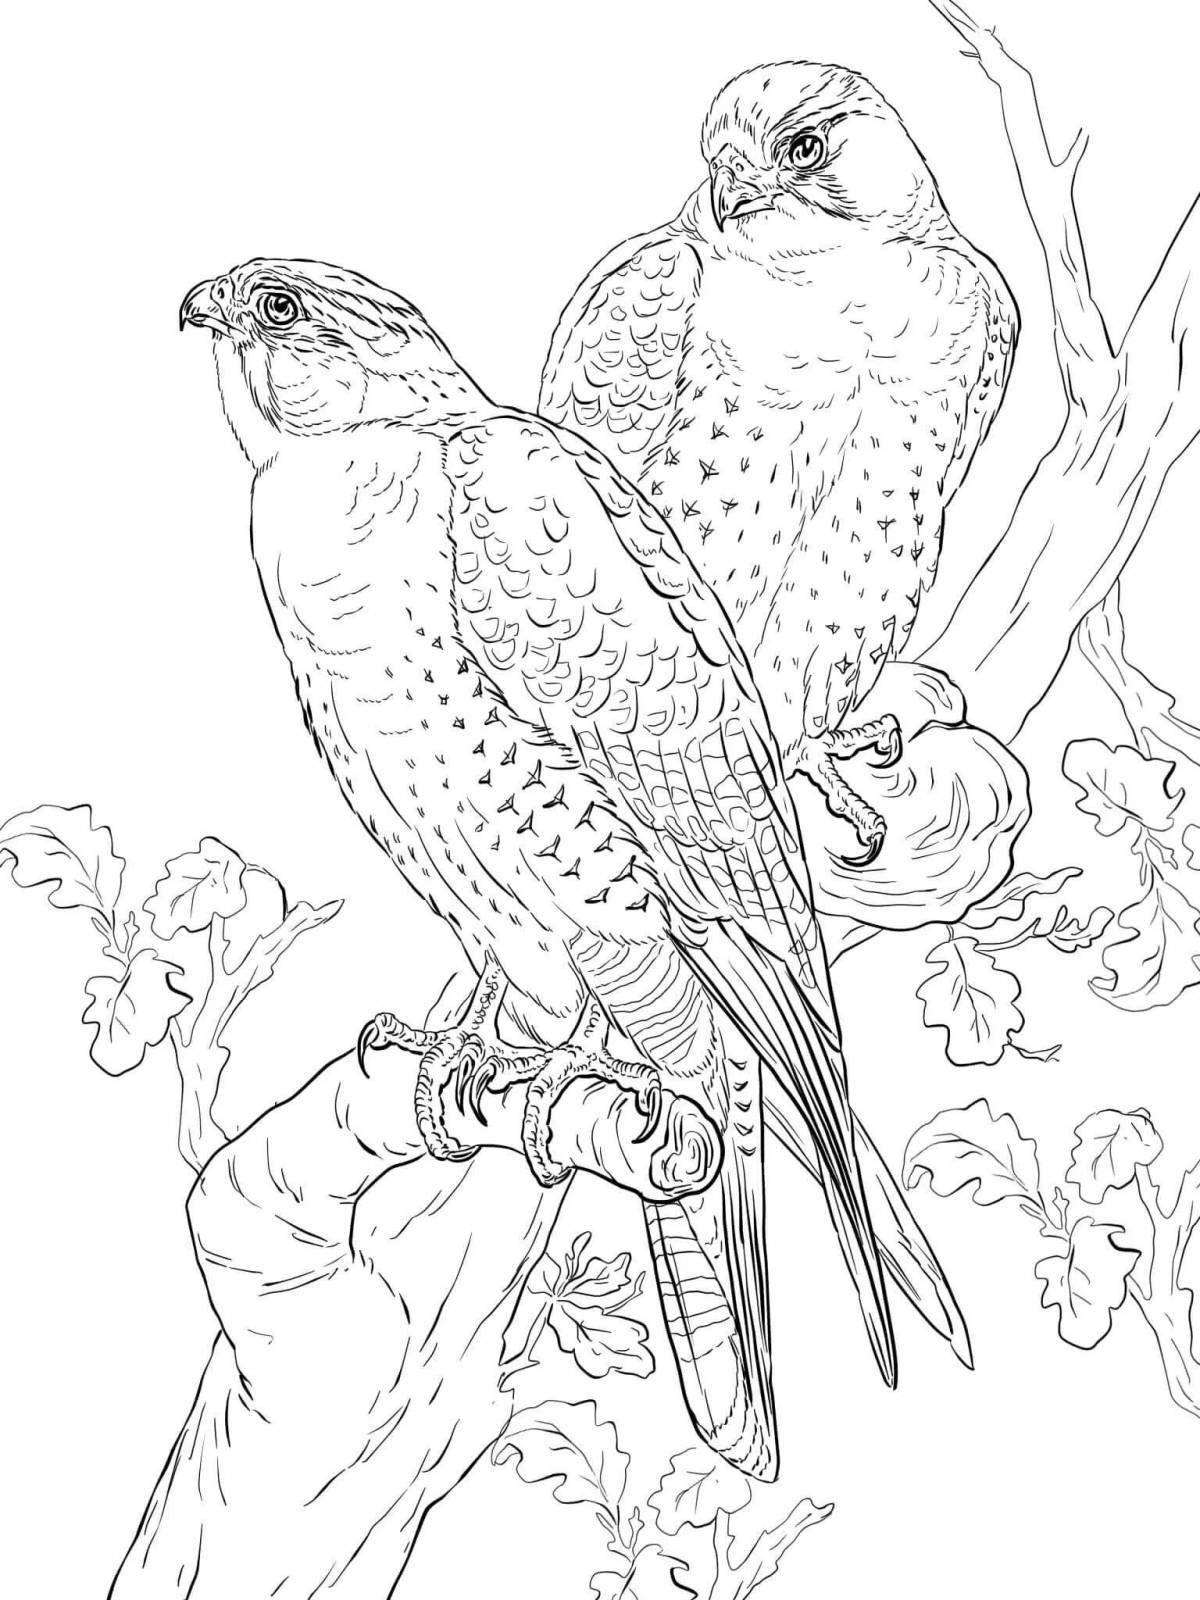 Charming merlin coloring book